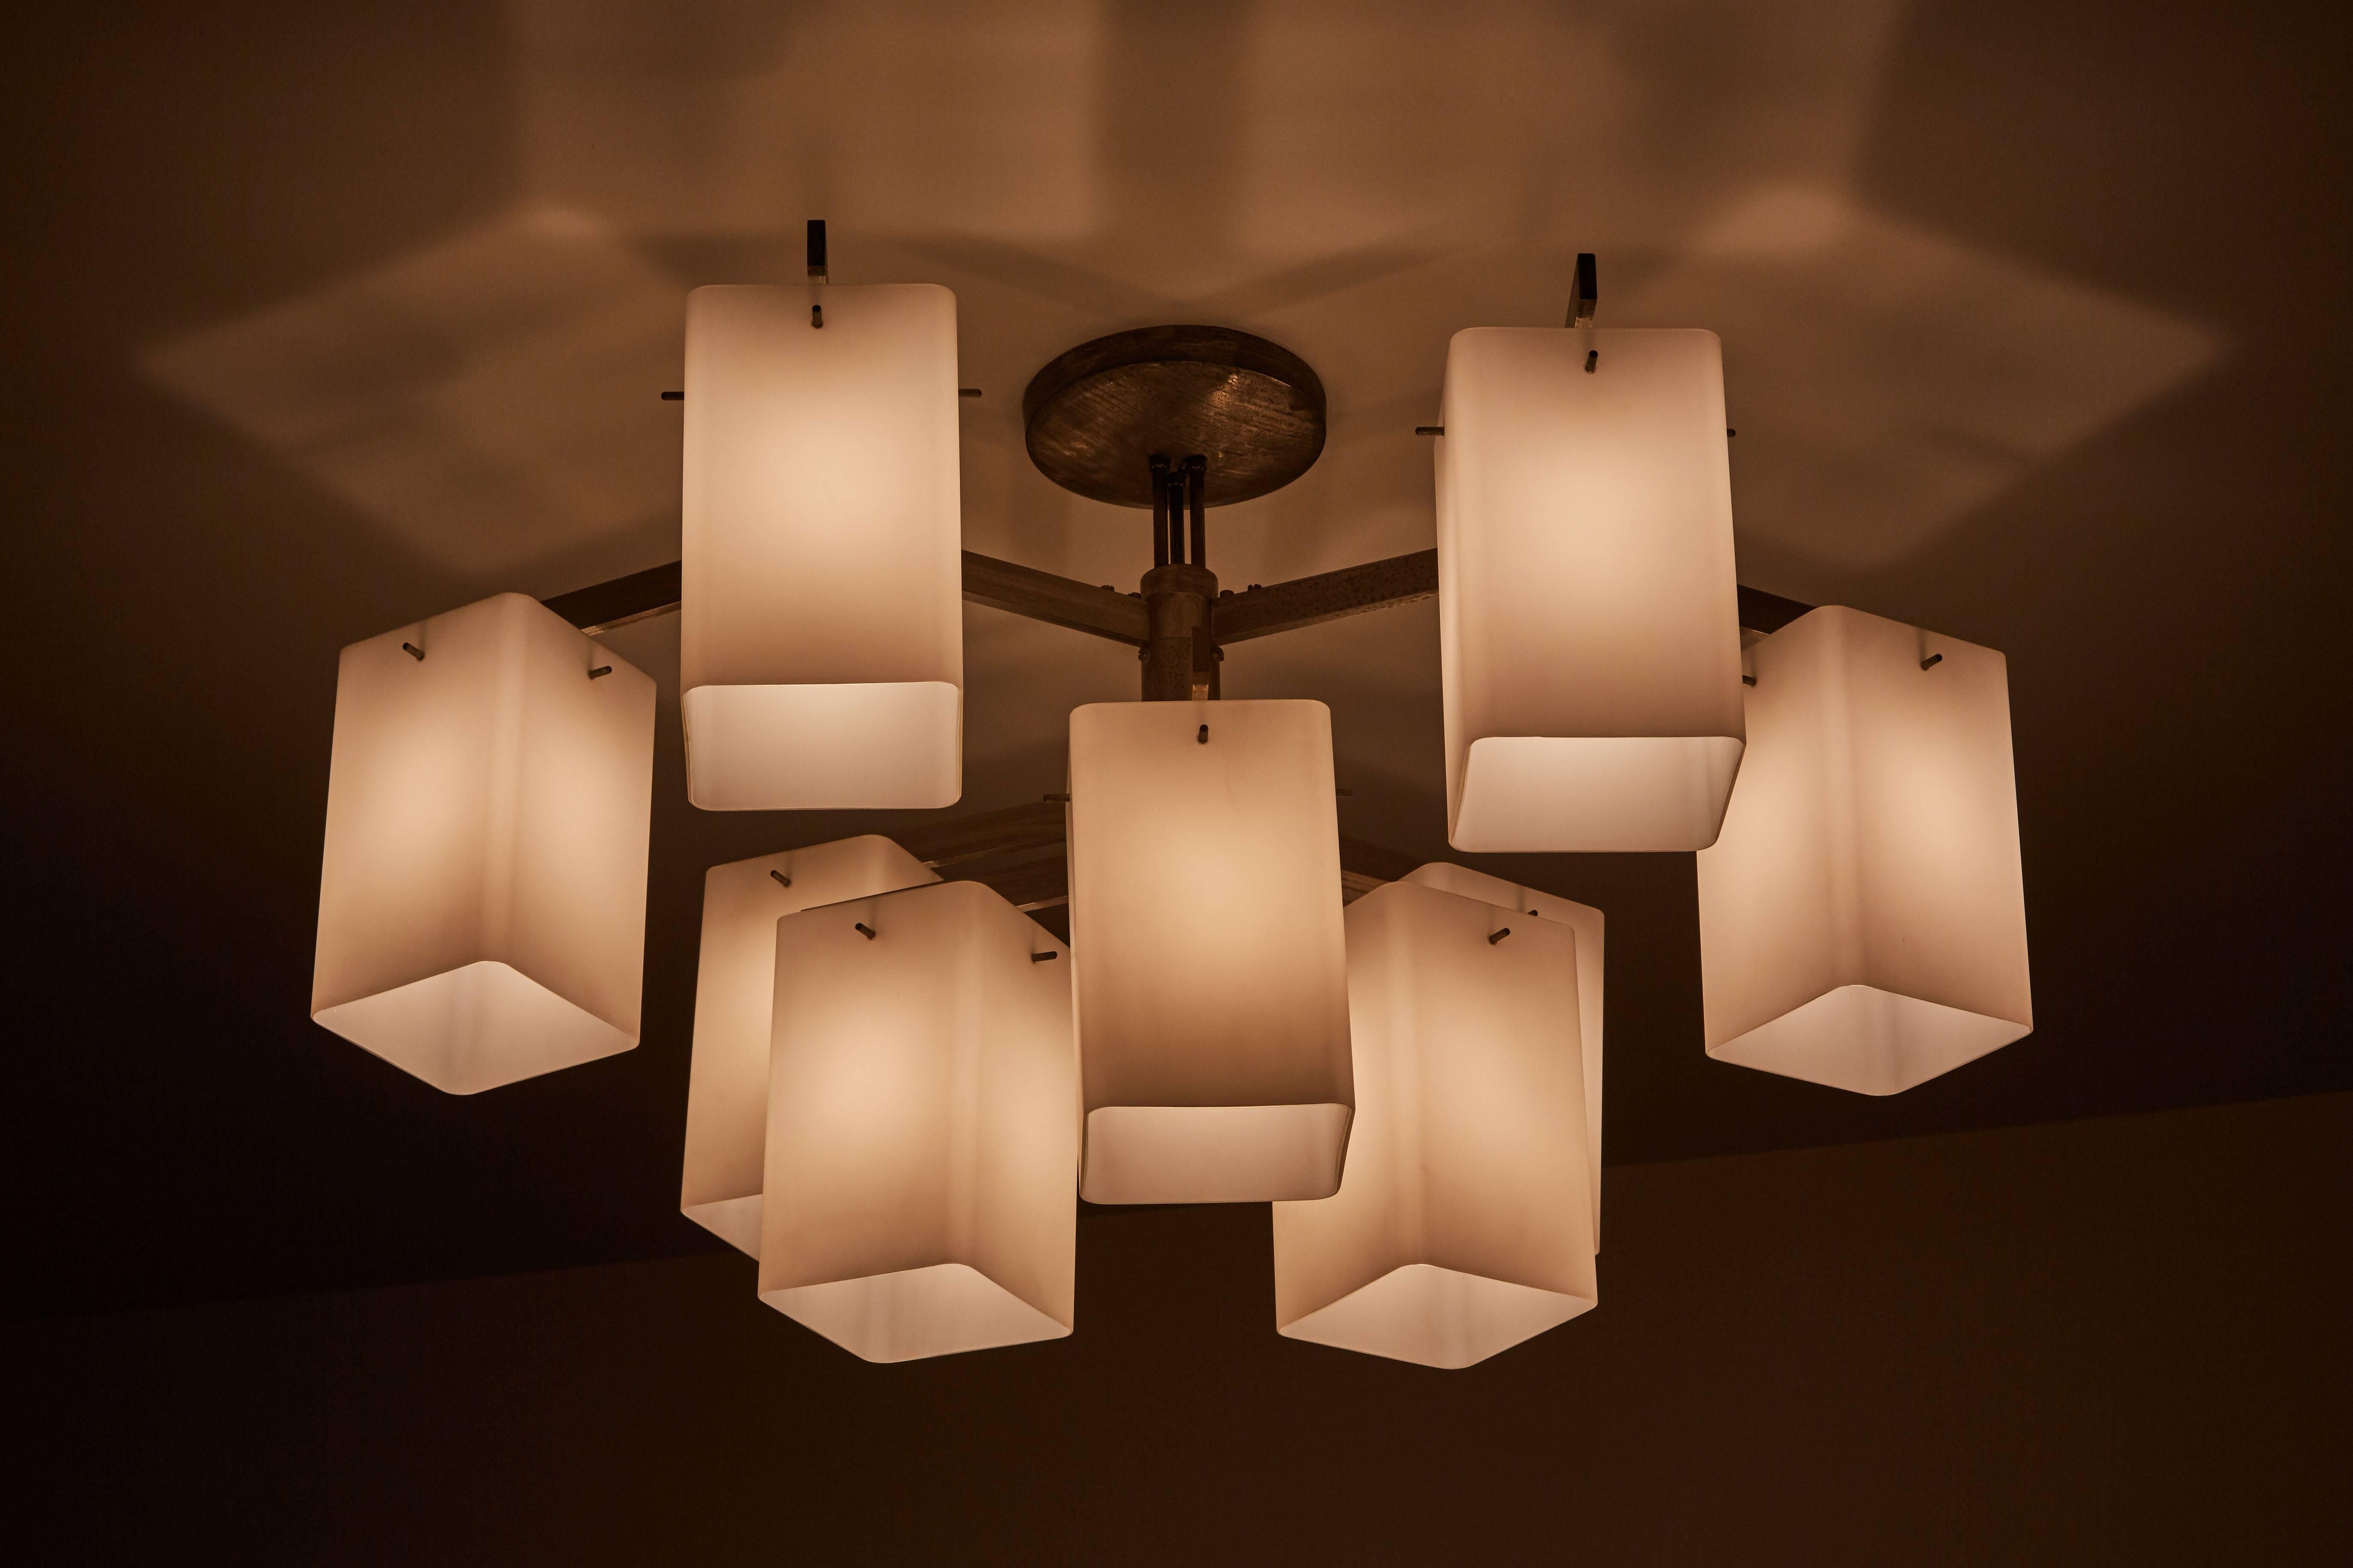 Rare chandelier with nine rectangular brushed satin glass shades and nickel plated brass. Designed by Stilnovo in Milan, circa 1960s. Takes 9 E27 40w maximum bulbs. Wired for US junction boxes.